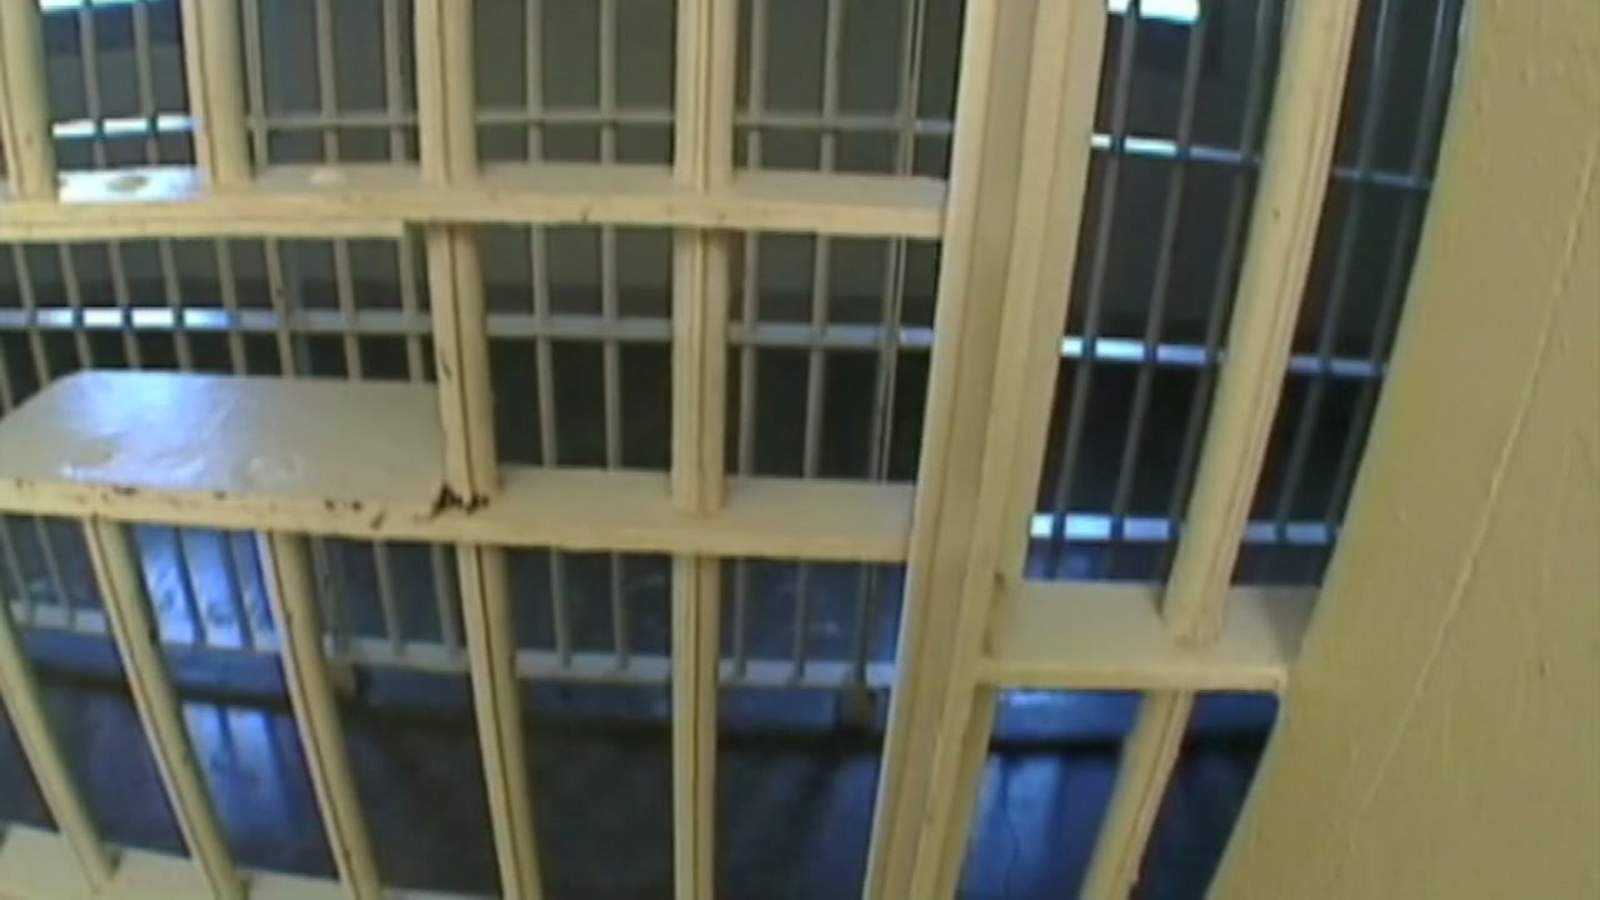 Florida inmate COVID-19 deaths up to 189